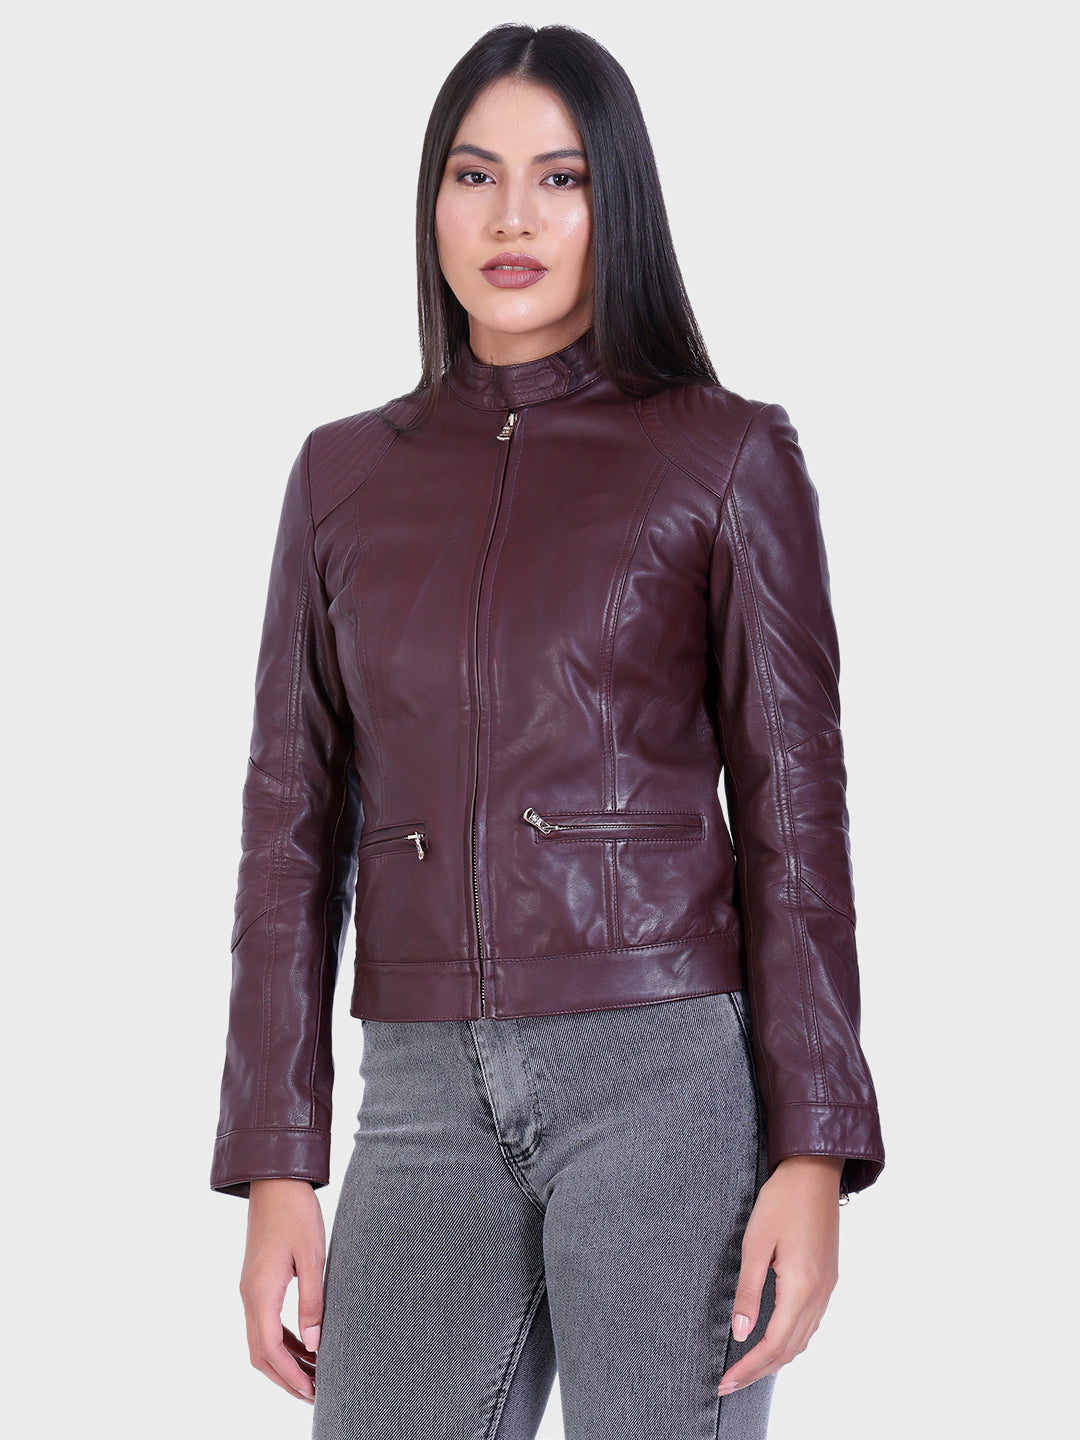 Justanned Chianti Leather Jacket